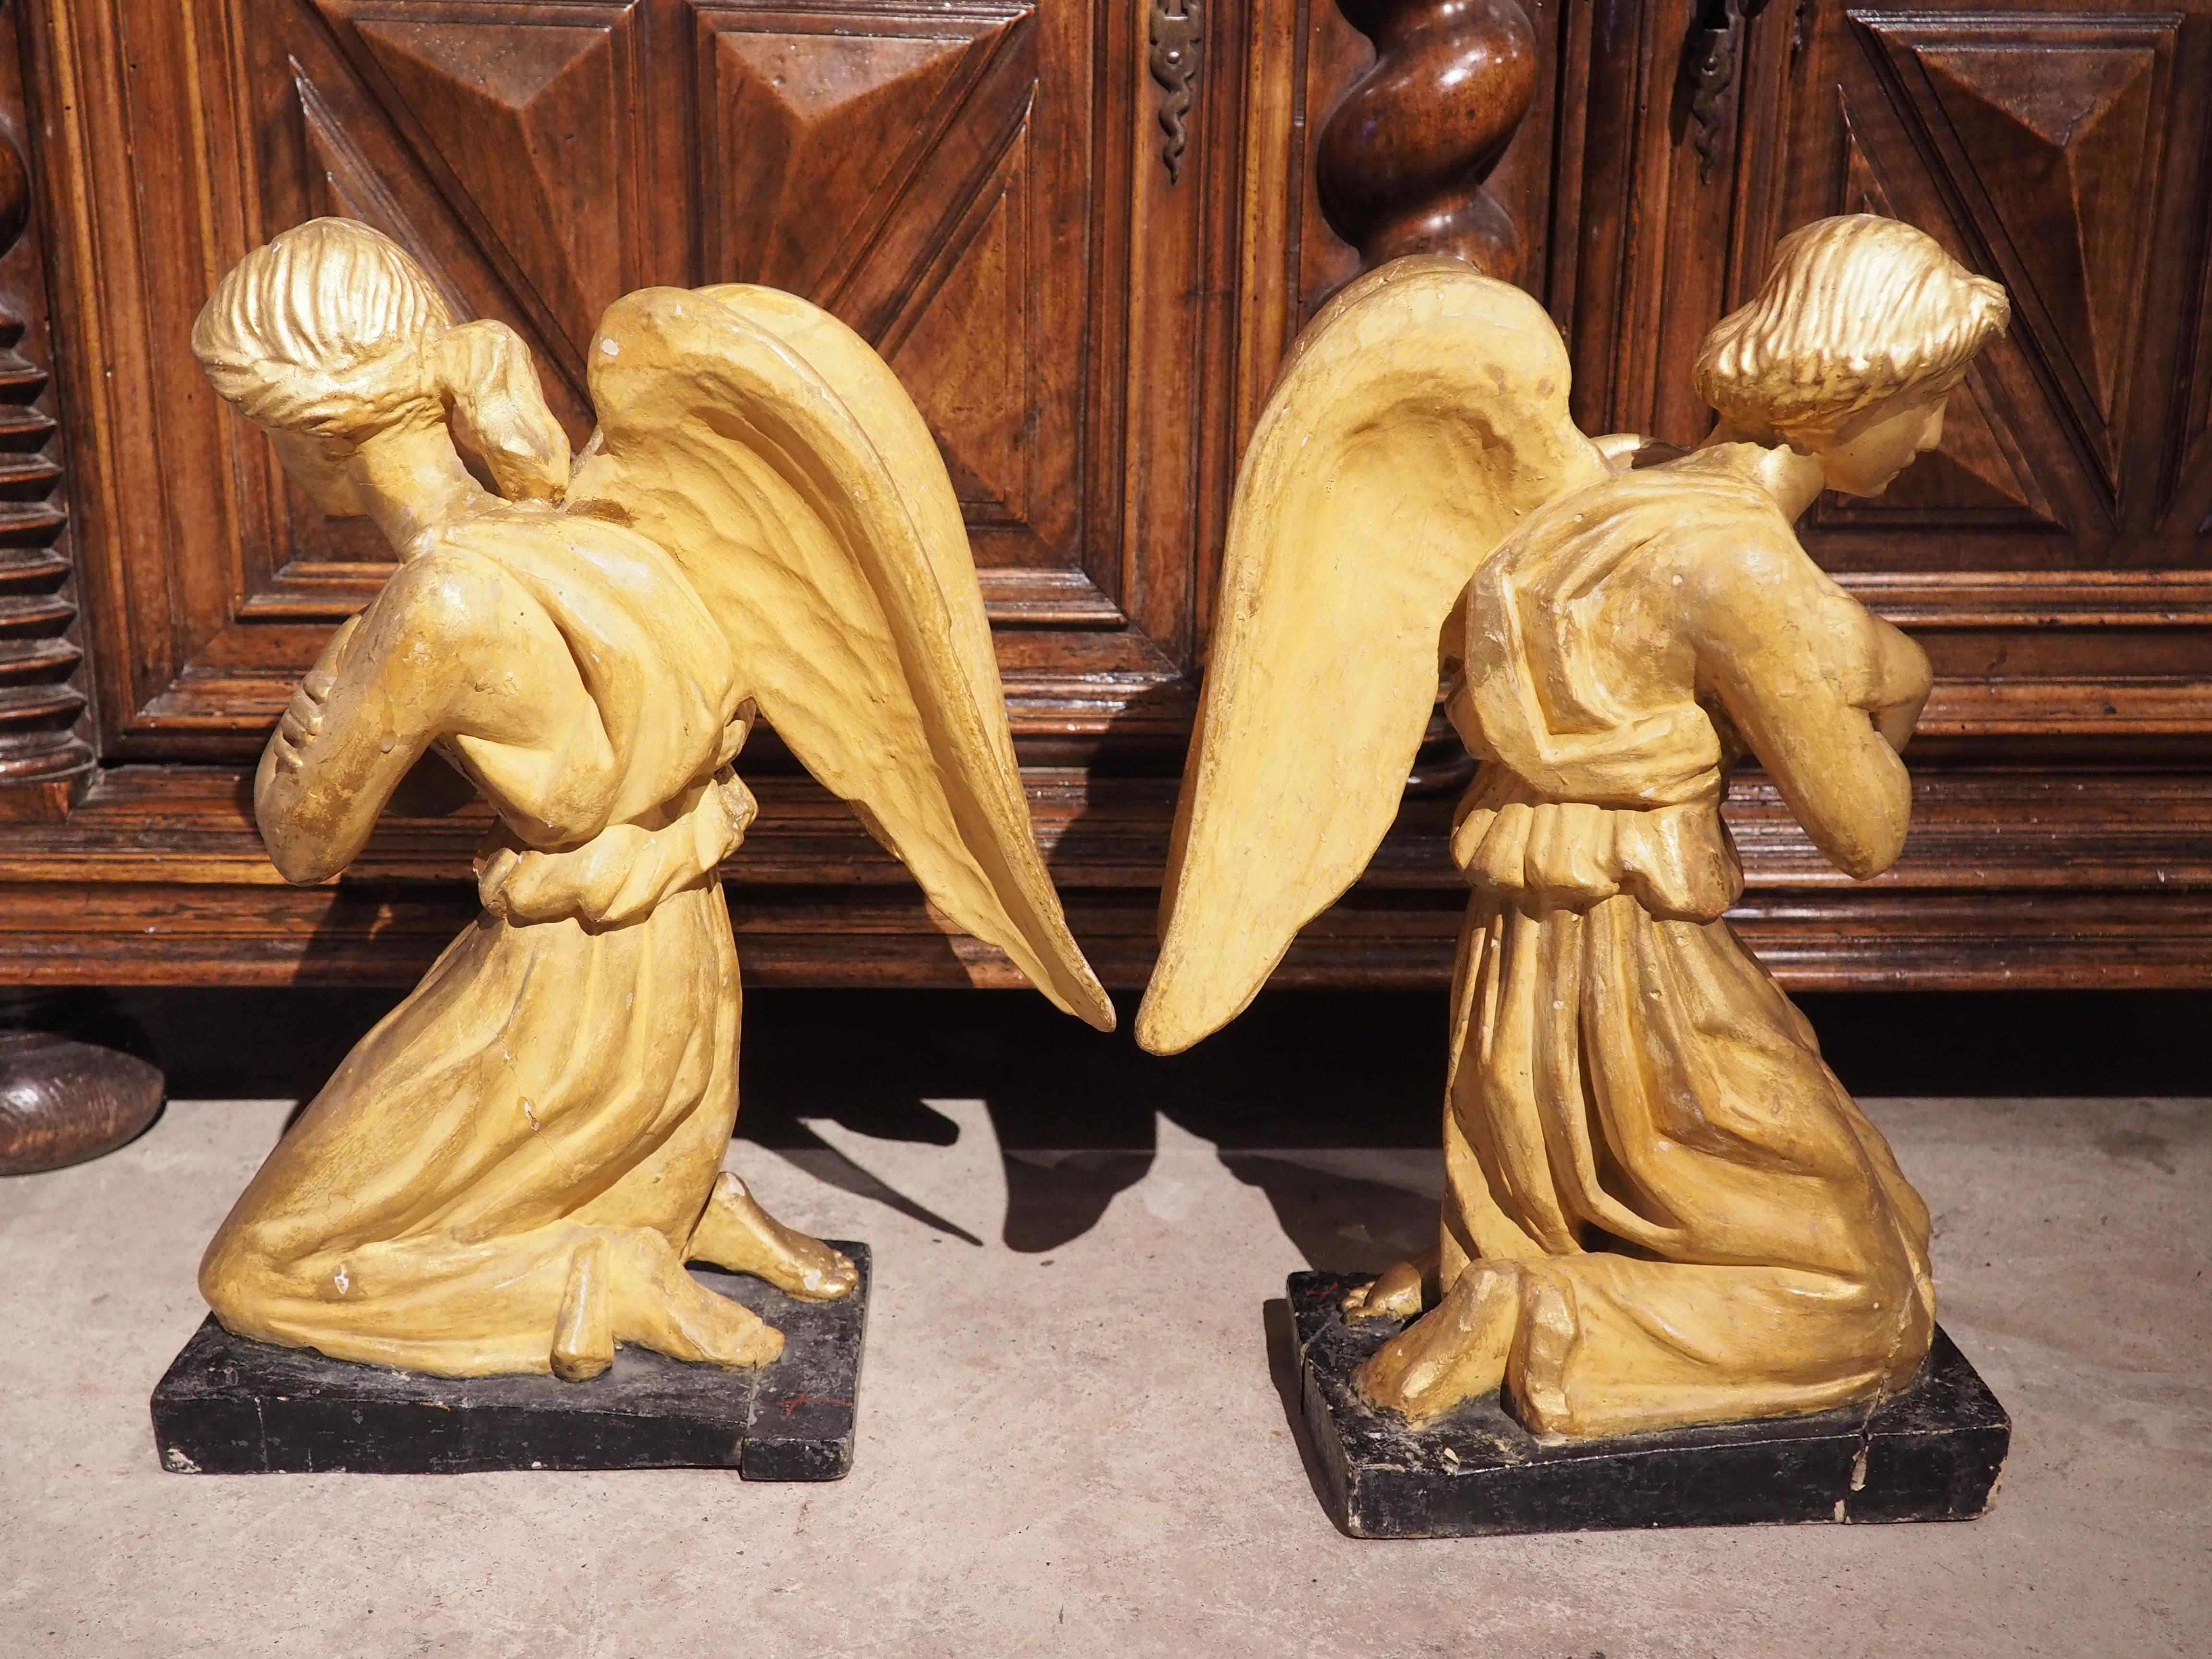 Hand-carved in Italy, circa 1800, this pair of giltwood angels is depicted in a double genuflection, or kneeling, stance. Both angels are completely gilded with addorsed wings and a long, flowing chiton gathered by a brooch at each shoulder. The